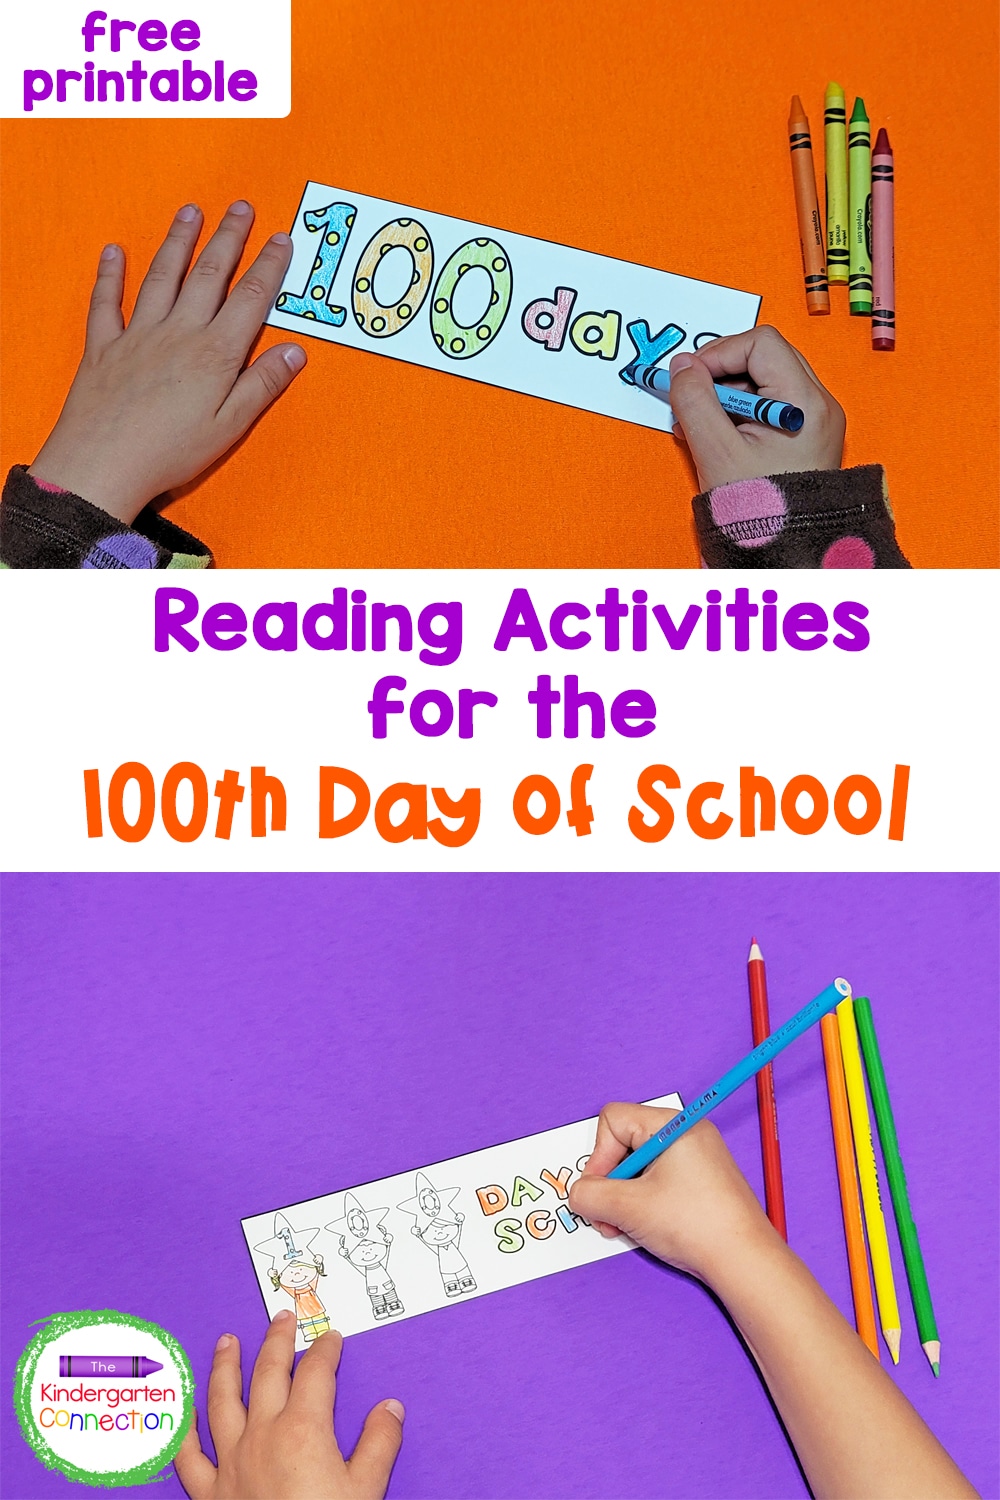 10 Reading Activities for the 100th Day of School